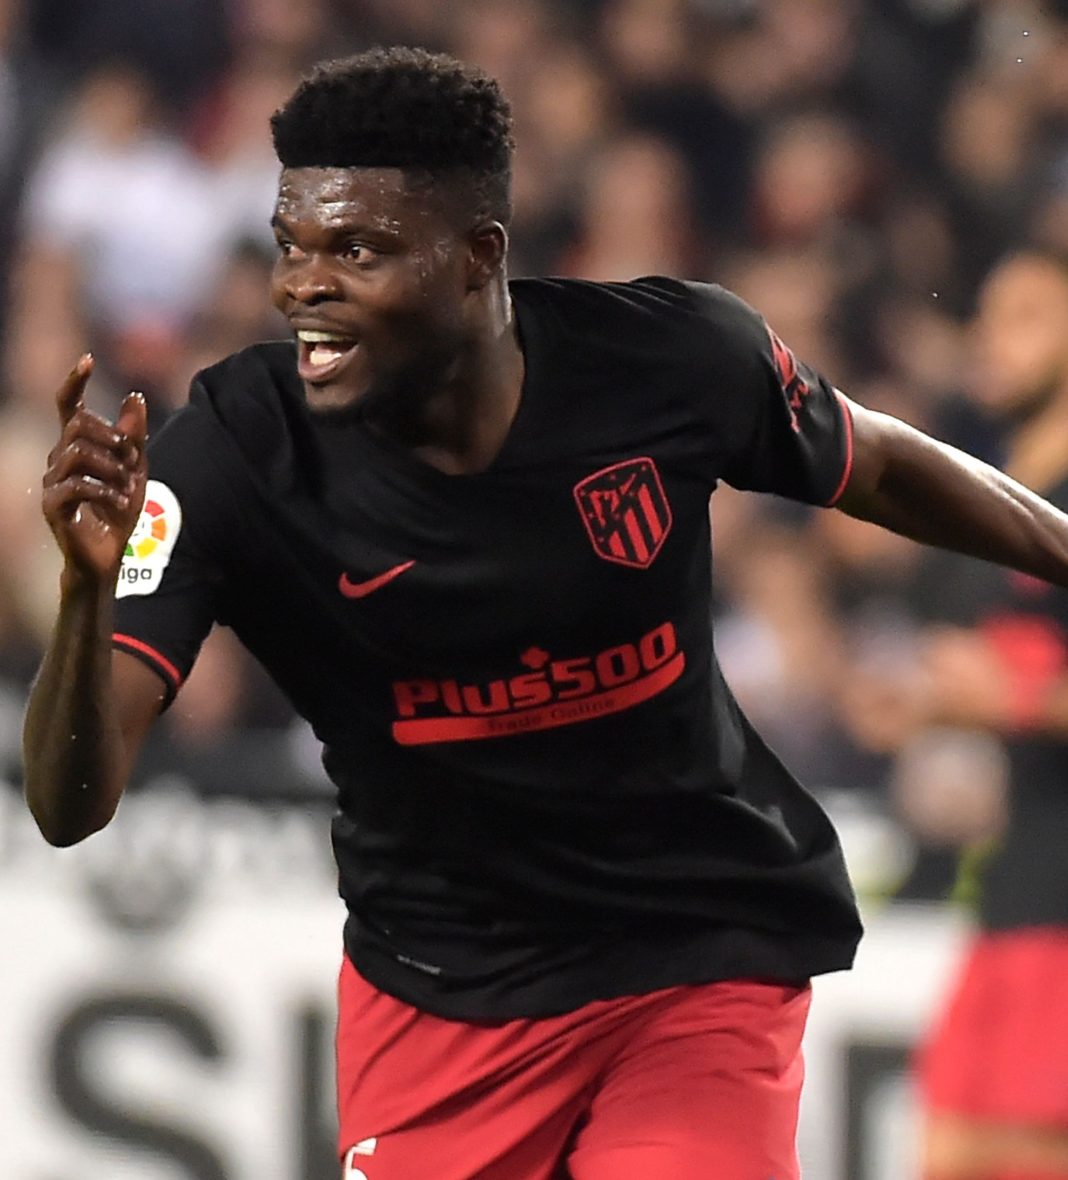 Atletico Madrid's Ghanaian midfielder Thomas Partey (C) celebrates after scoring during the Spanish league football match between Valencia CF and Club Atletico de Madrid at the Mestalla stadium in Valencia on February 14, 2020. (Photo by JOSE JORDAN / AFP) (Photo by JOSE JORDAN/AFP via Getty Images)